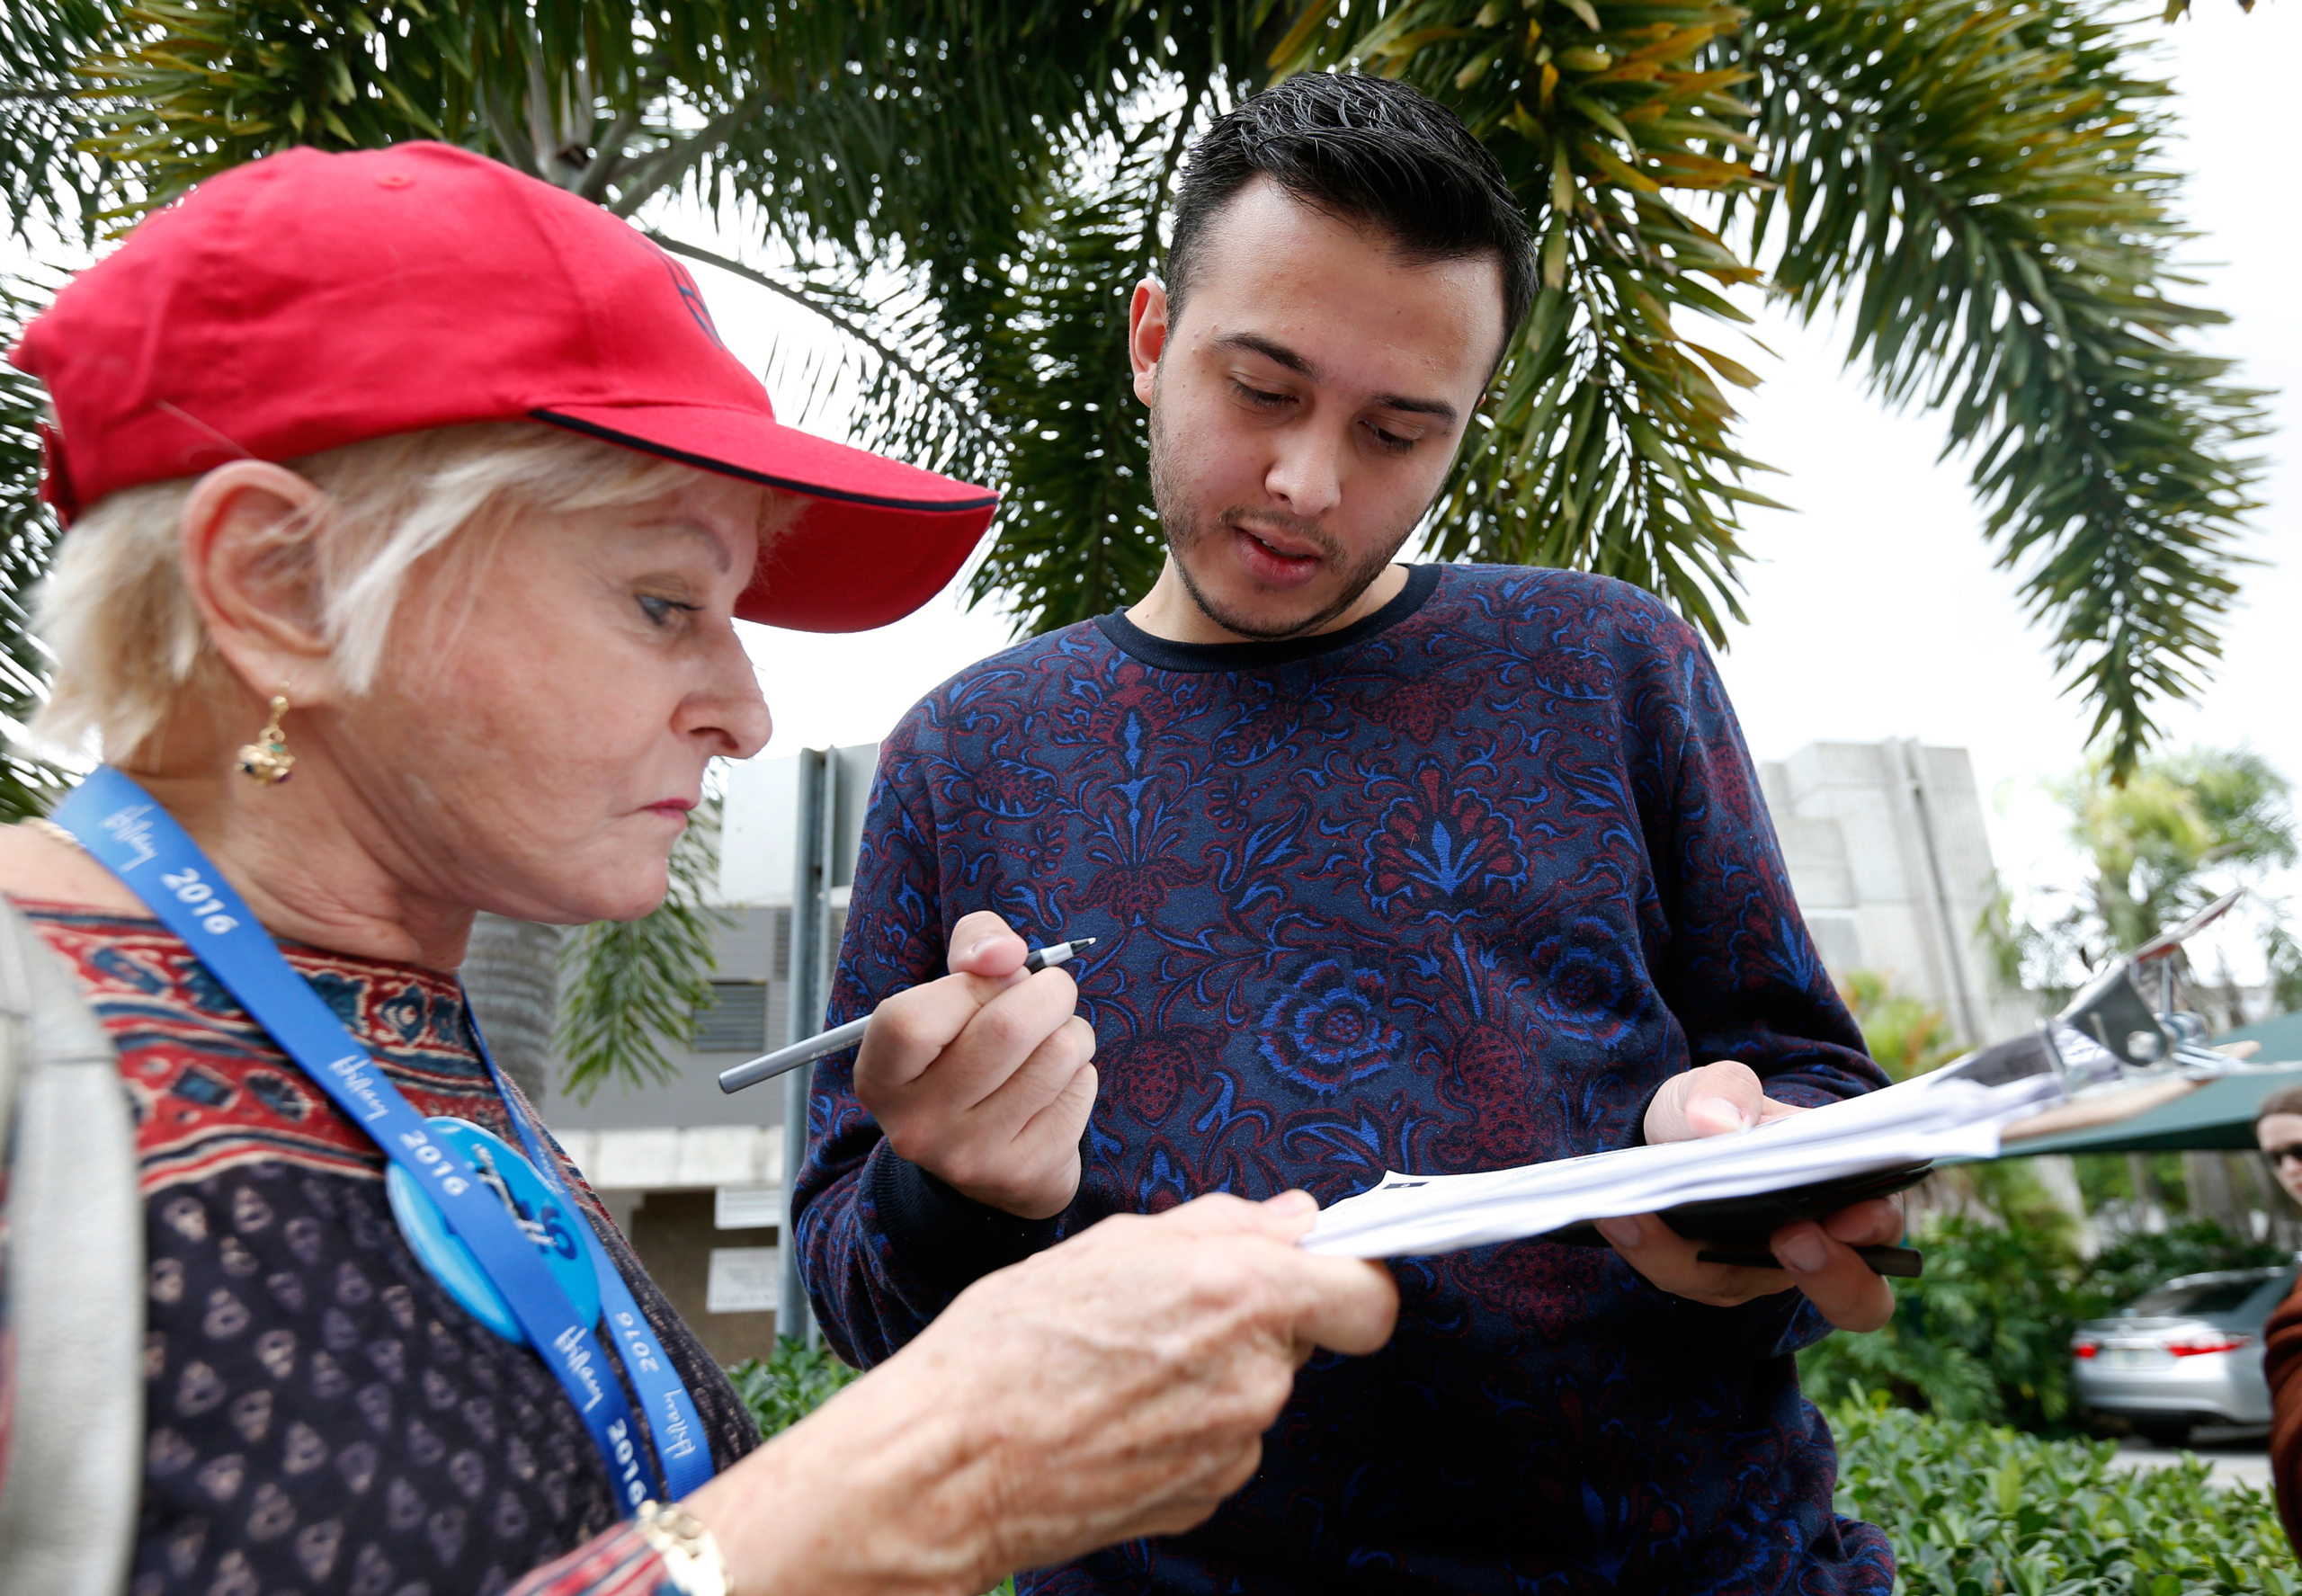 Volunteer Sandi Strickland, left, helps Roman Rodriguez, right, fill out a new voter registration form because of a change of address, as he waits in line to attend a rally for Democratic presidential candidate Hillary Clinton and former vice president Al Gore, Tuesday, Oct. 11, 2016, in Miami. A federal judge has given Democrats a partial victory in the presidential battleground of Florida, extending the state's voter registration deadline one day and agreeing to consider a longer extension in the wake of Hurricane Matthew. (AP Photo/Wilfredo Lee)